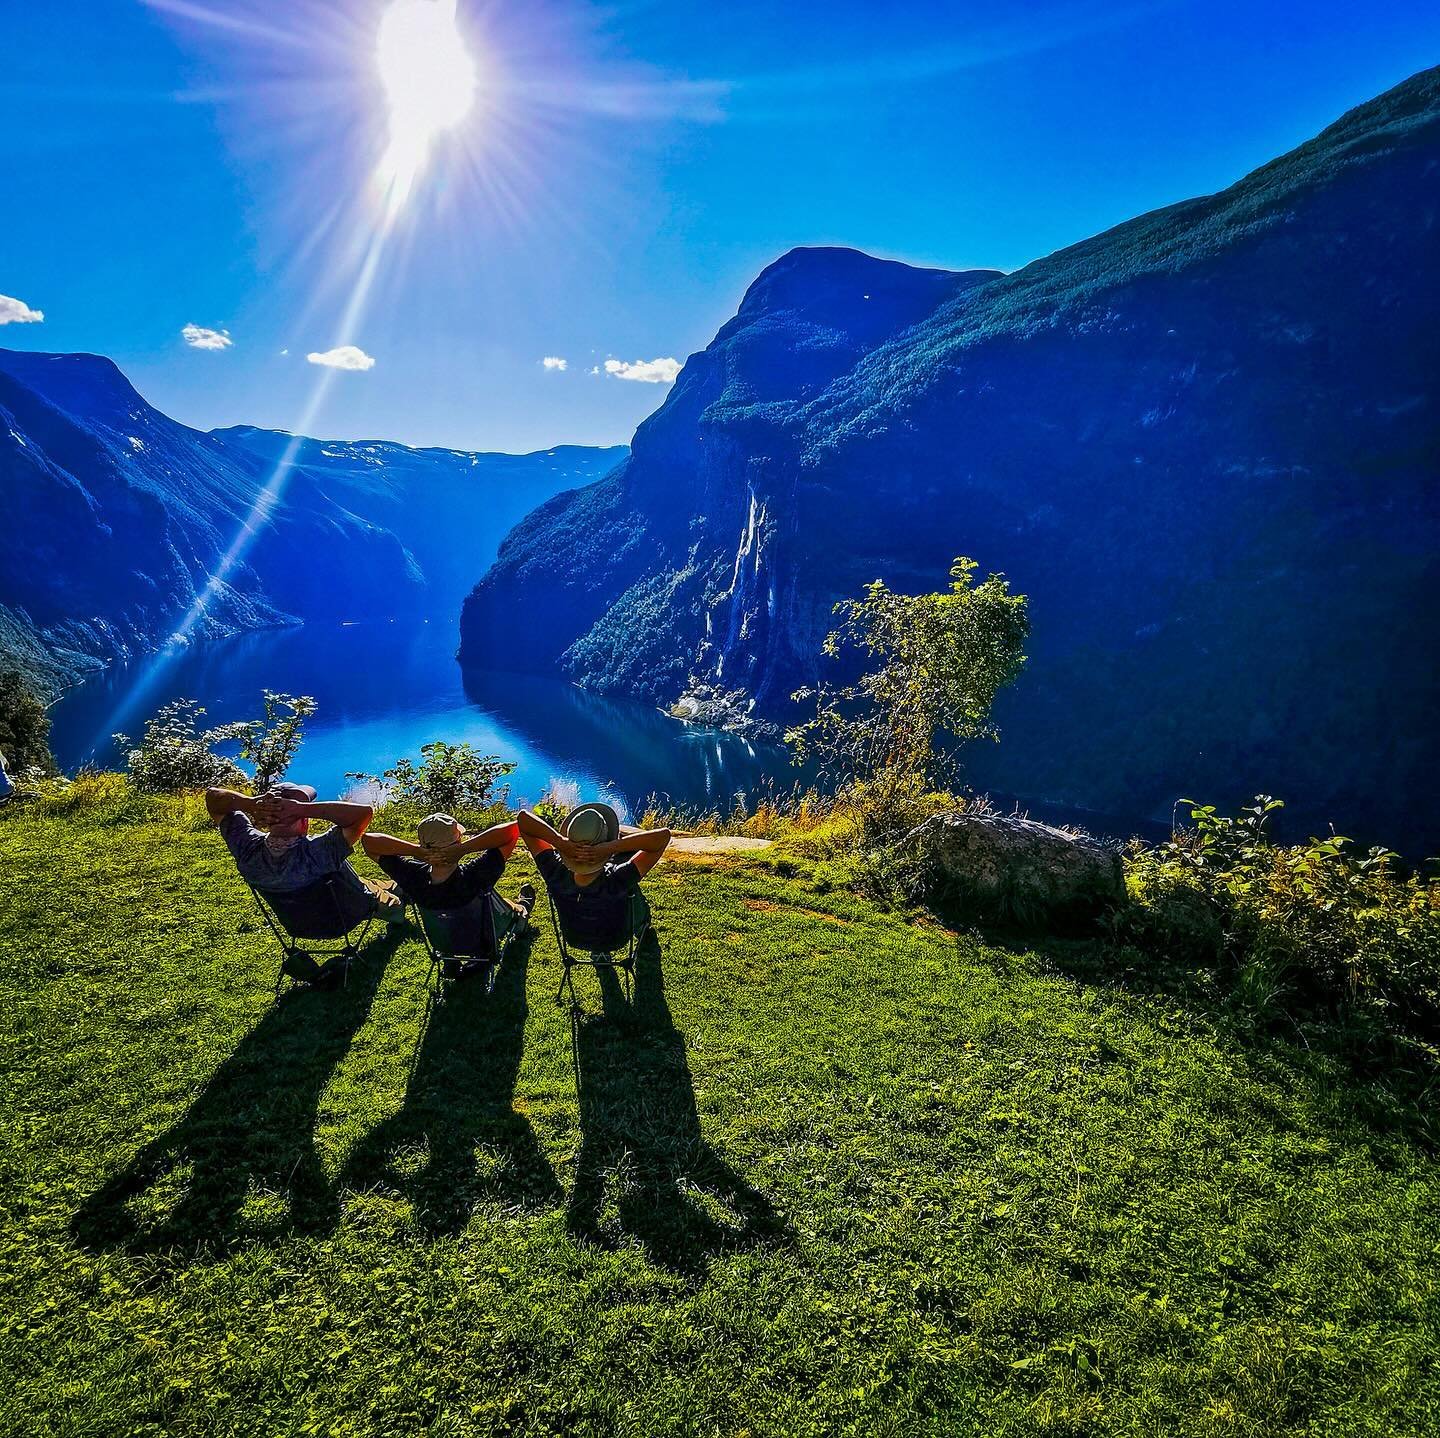 🇳🇴Norway awaits this Summer!🌞 Kick off your sandals and let&rsquo;s go sailing from June 20th to September&rsquo;s end! 

⛵️We&rsquo;re offering three tailor-made journeys between 6 and 8 days, each crafted for those who love to mix relaxation wit